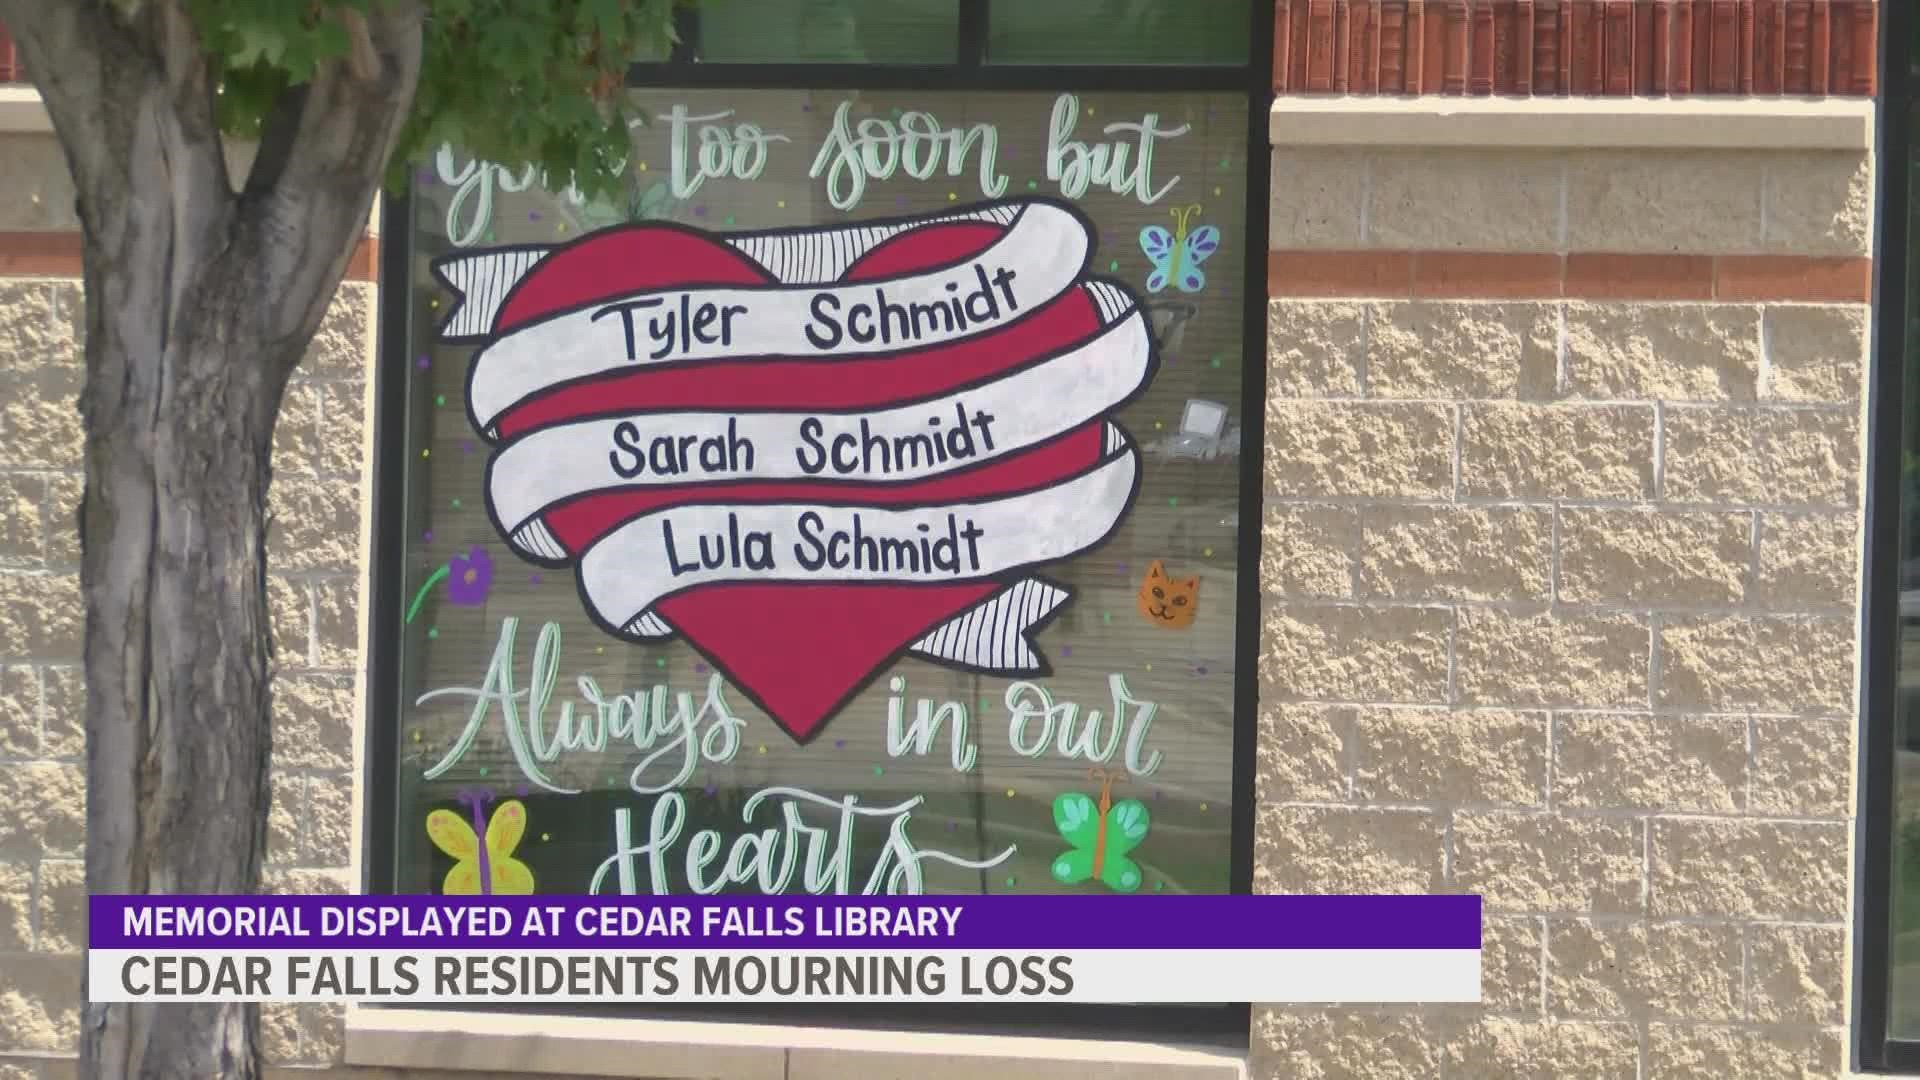 Sara Schmidt, one of three people killed, was an employee at the city's public library where a memorial was created.